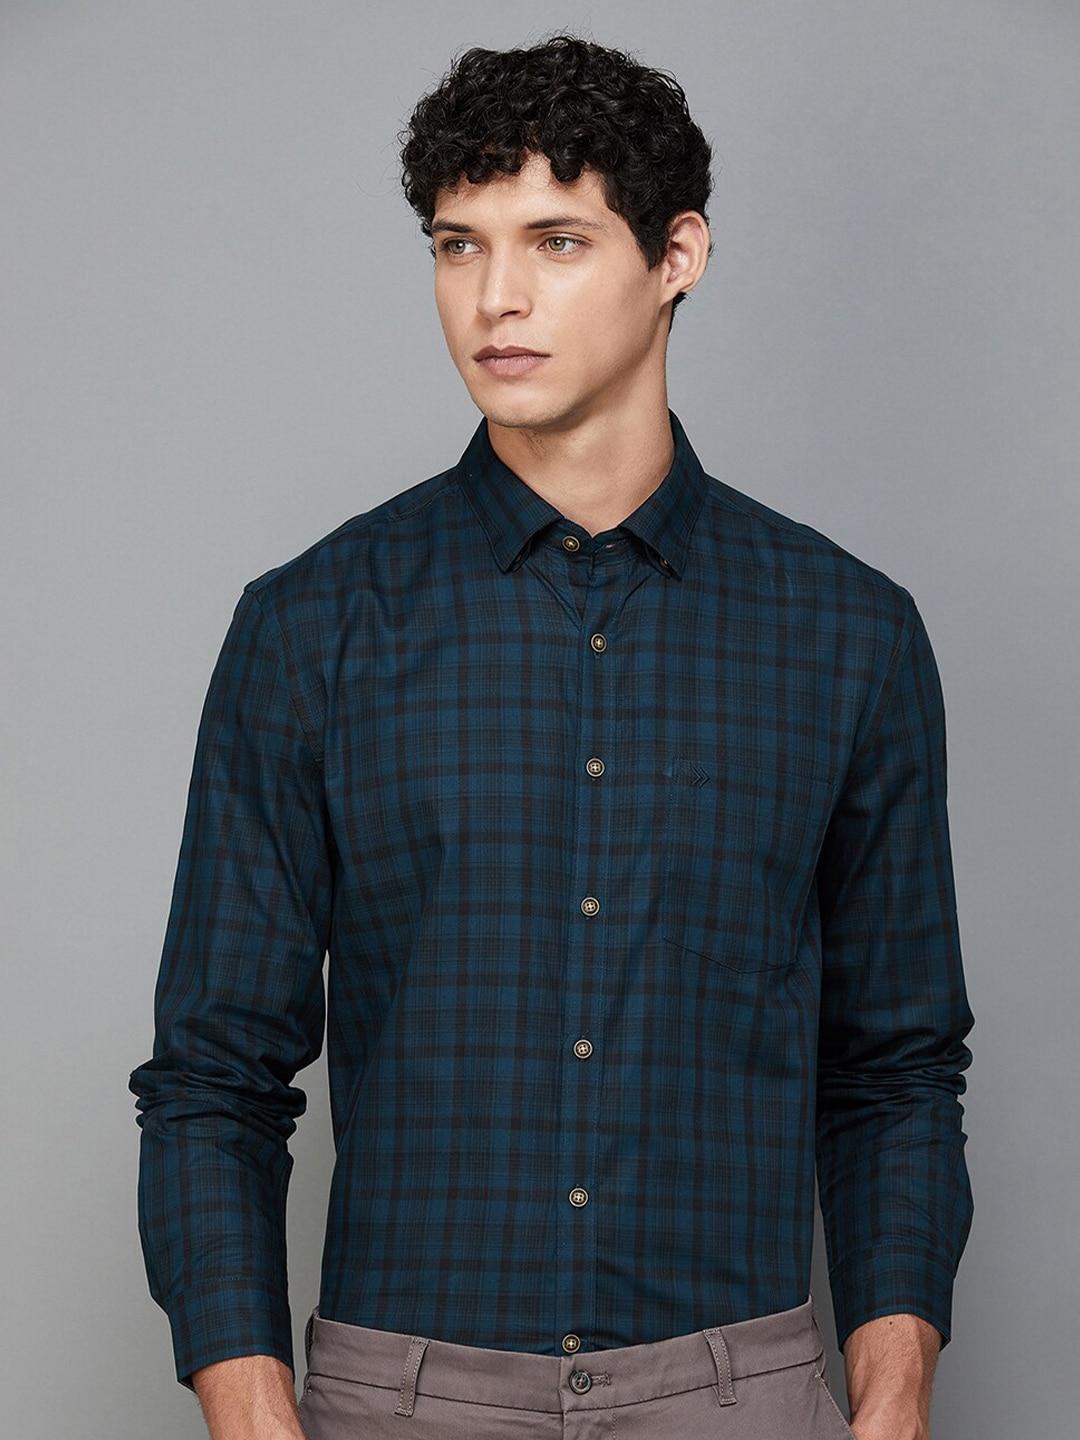 code by lifestyle tartan checked slim fit cotton casual shirt